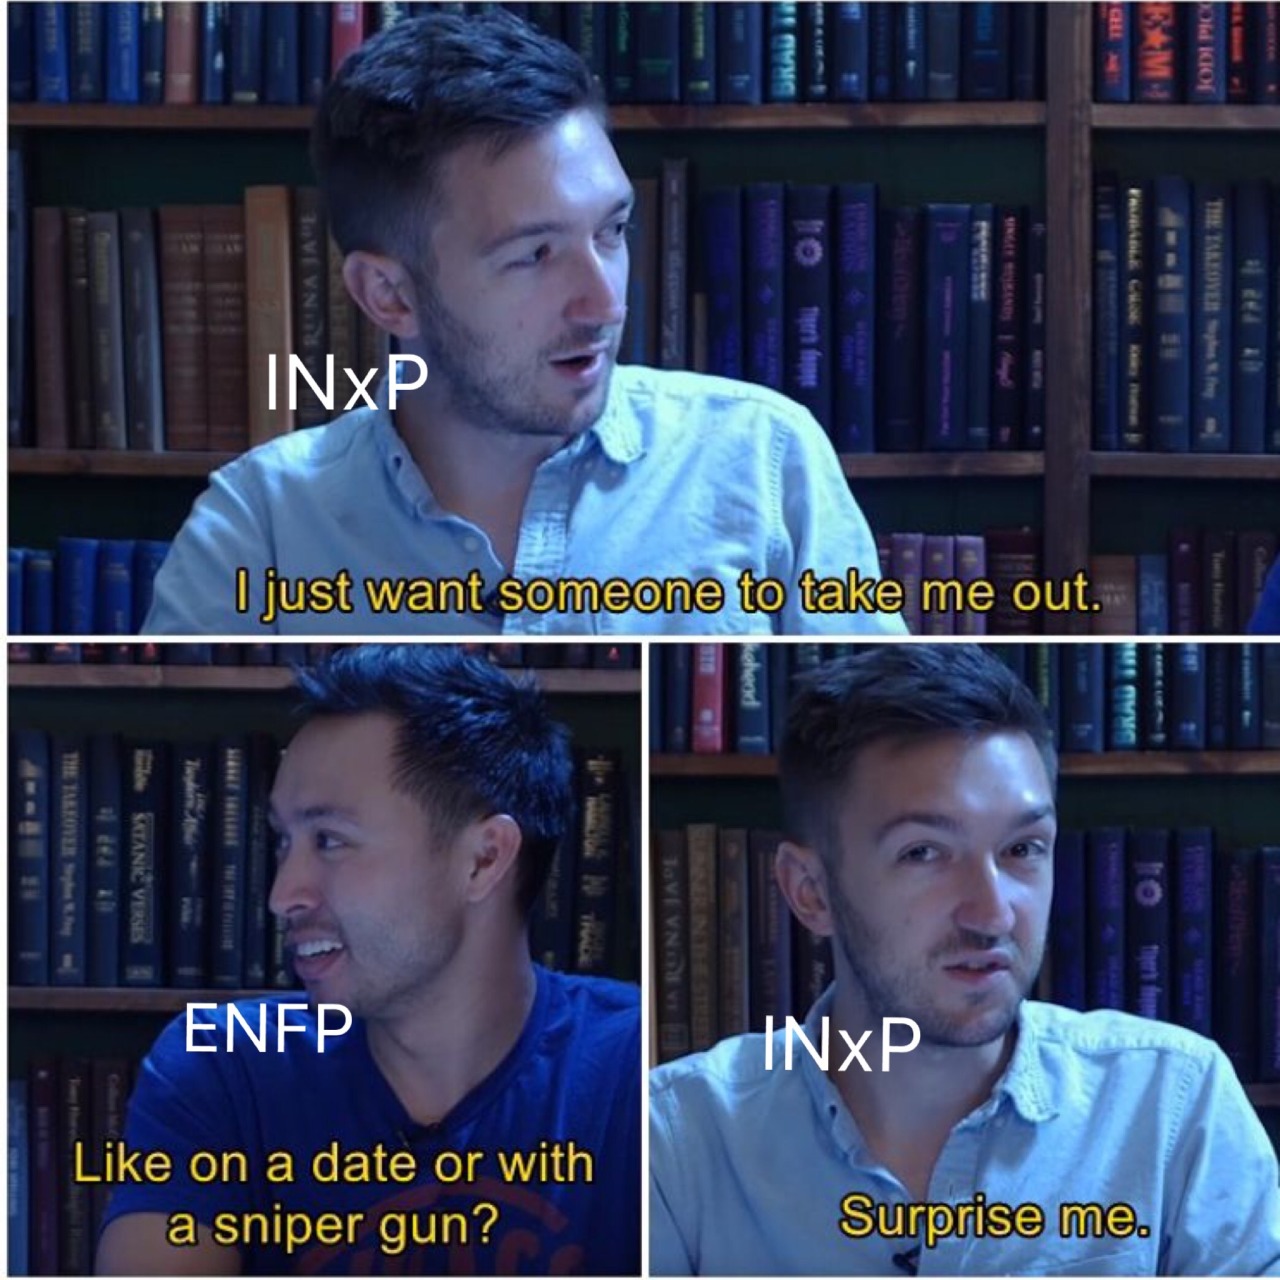 incorrect infp | Tumblr